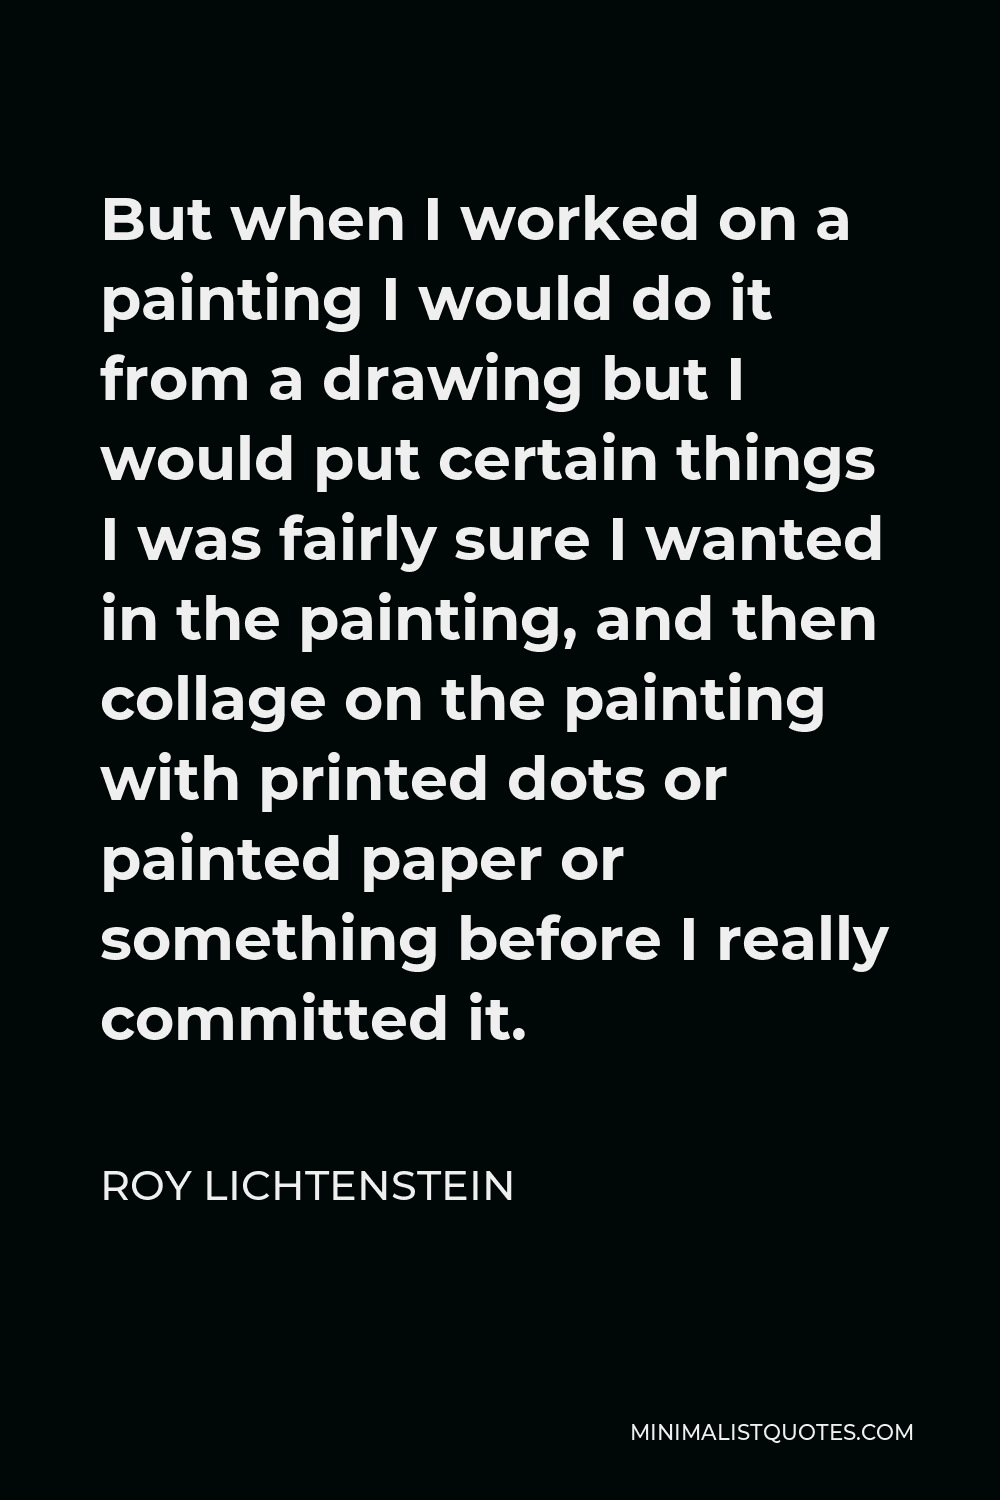 Roy Lichtenstein Quote - But when I worked on a painting I would do it from a drawing but I would put certain things I was fairly sure I wanted in the painting, and then collage on the painting with printed dots or painted paper or something before I really committed it.